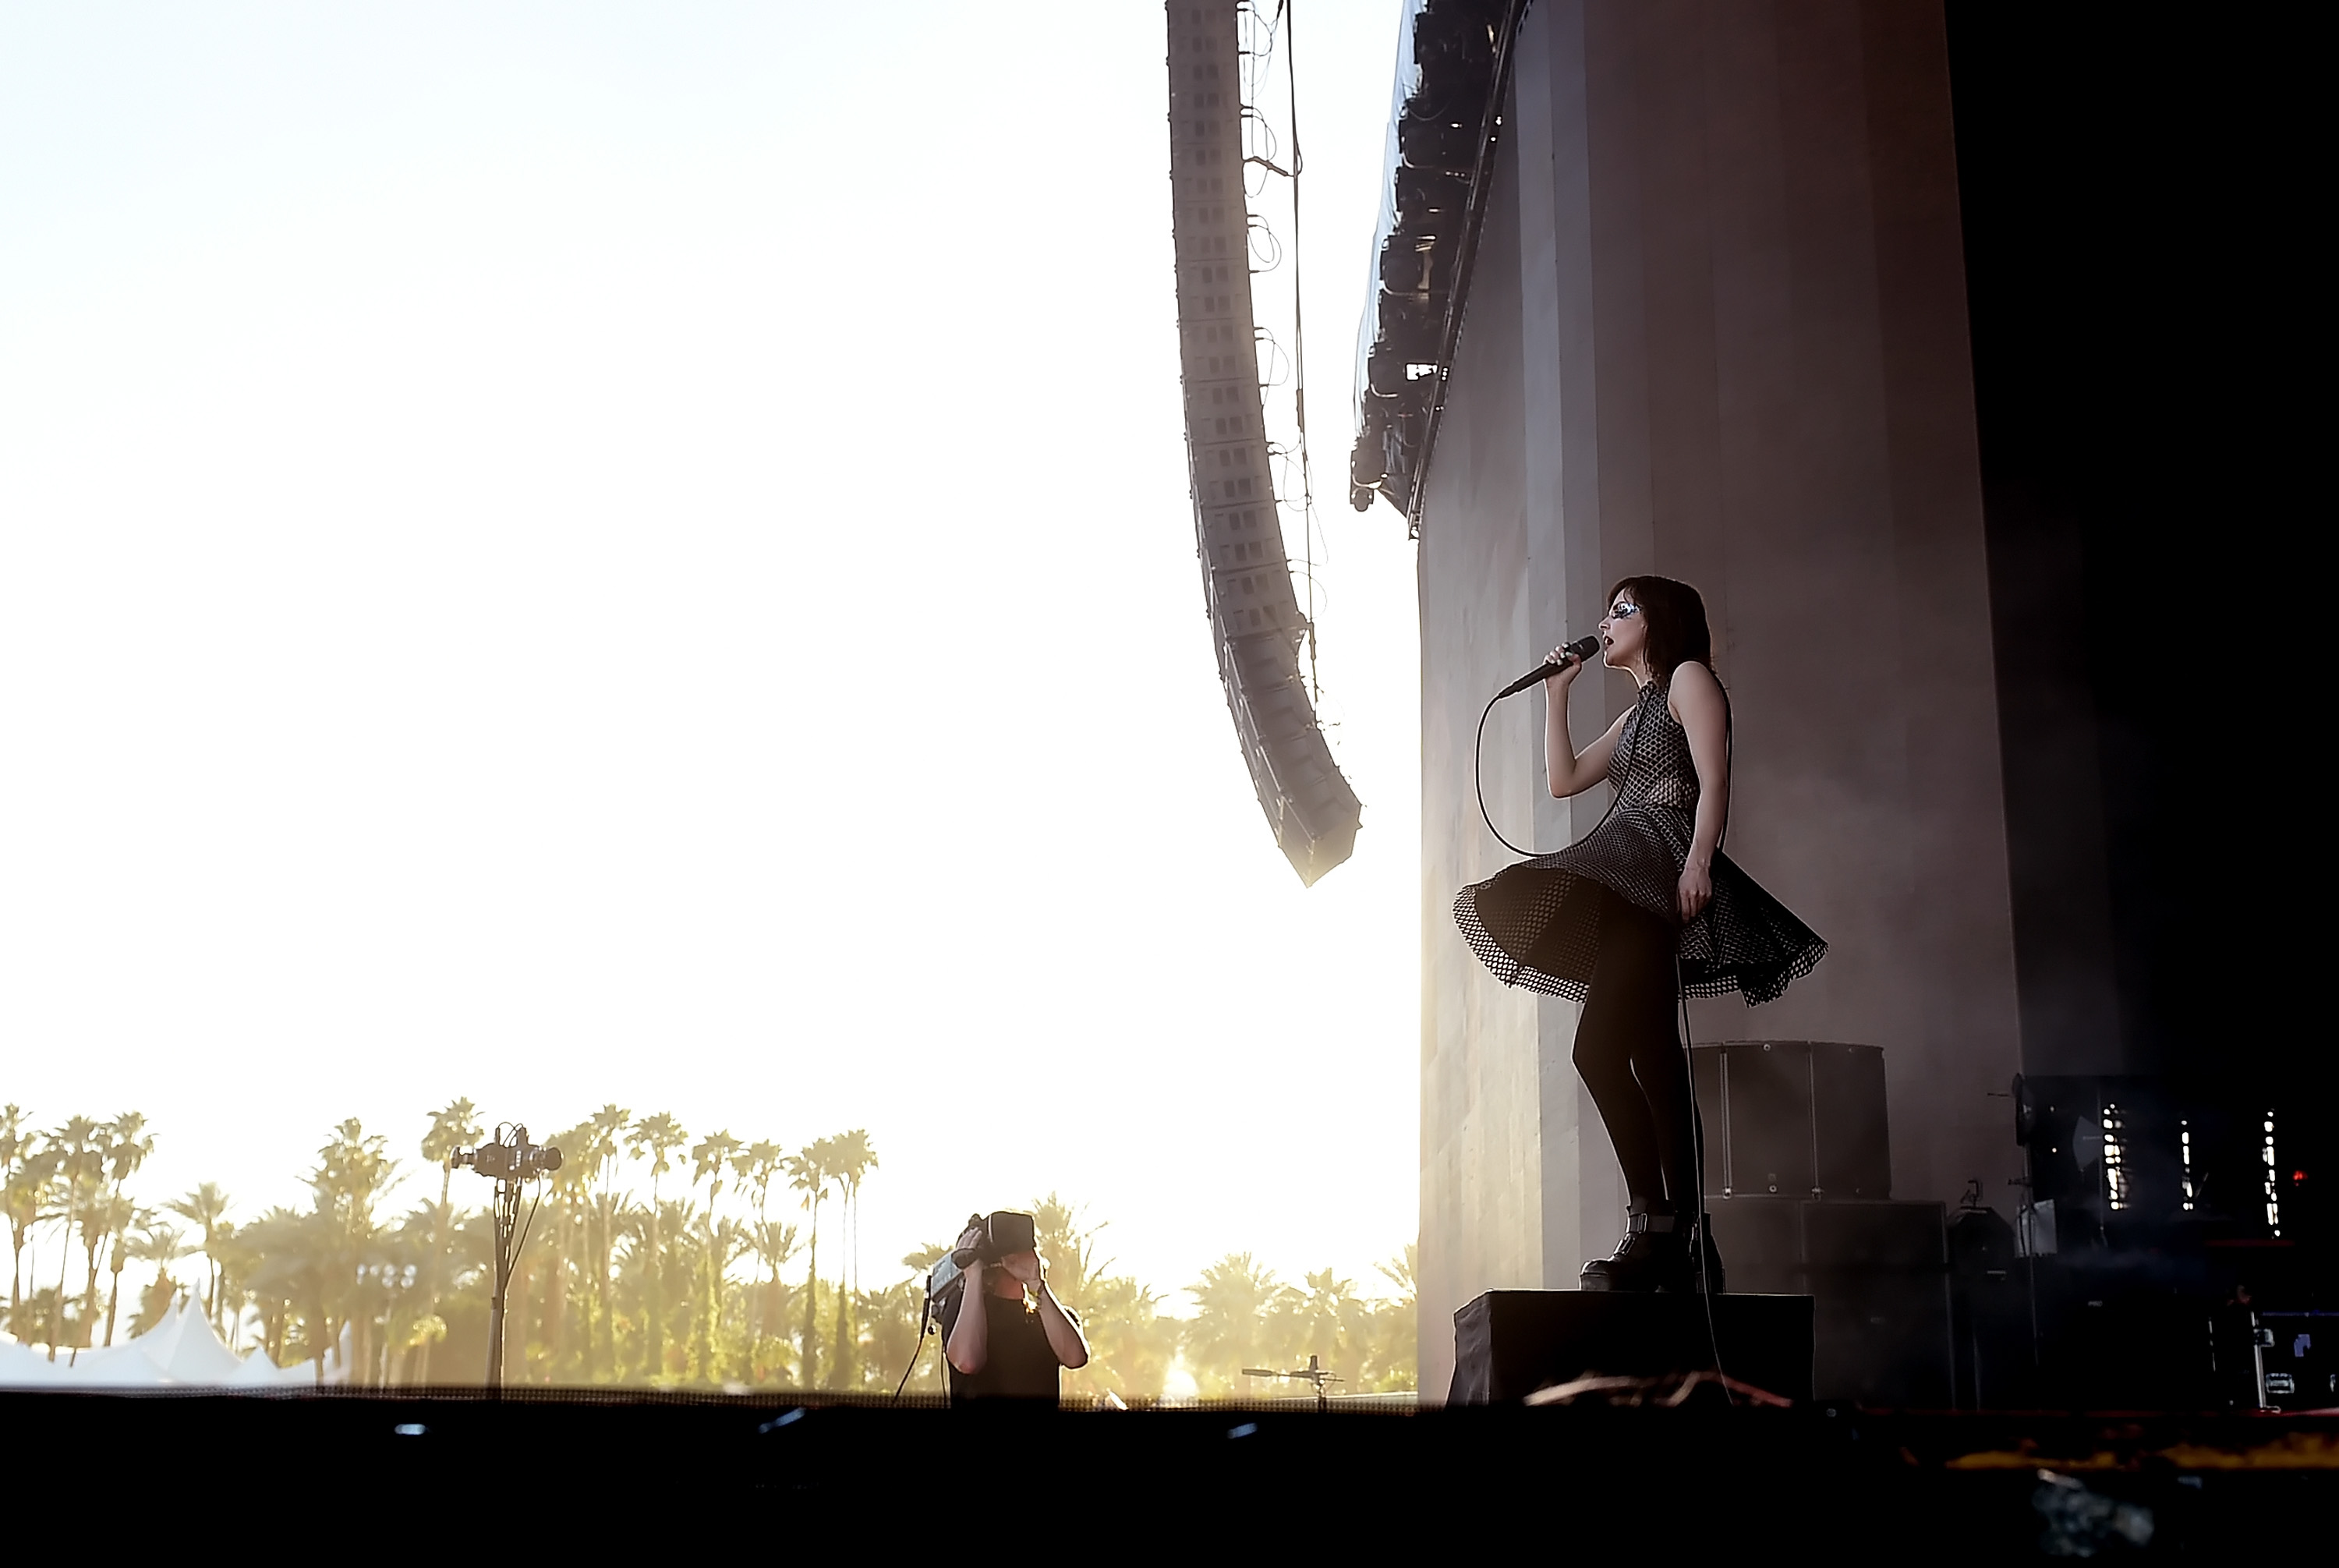 INDIO, CA - APRIL 23:  Musician Lauren Mayberry of Chvrches performs onstage during day 2 of the 2016 Coachella Valley Music & Arts Festival Weekend 2 at the Empire Polo Club on April 23, 2016 in Indio, California.  (Photo by Kevin Winter/Getty Images for Coachella)